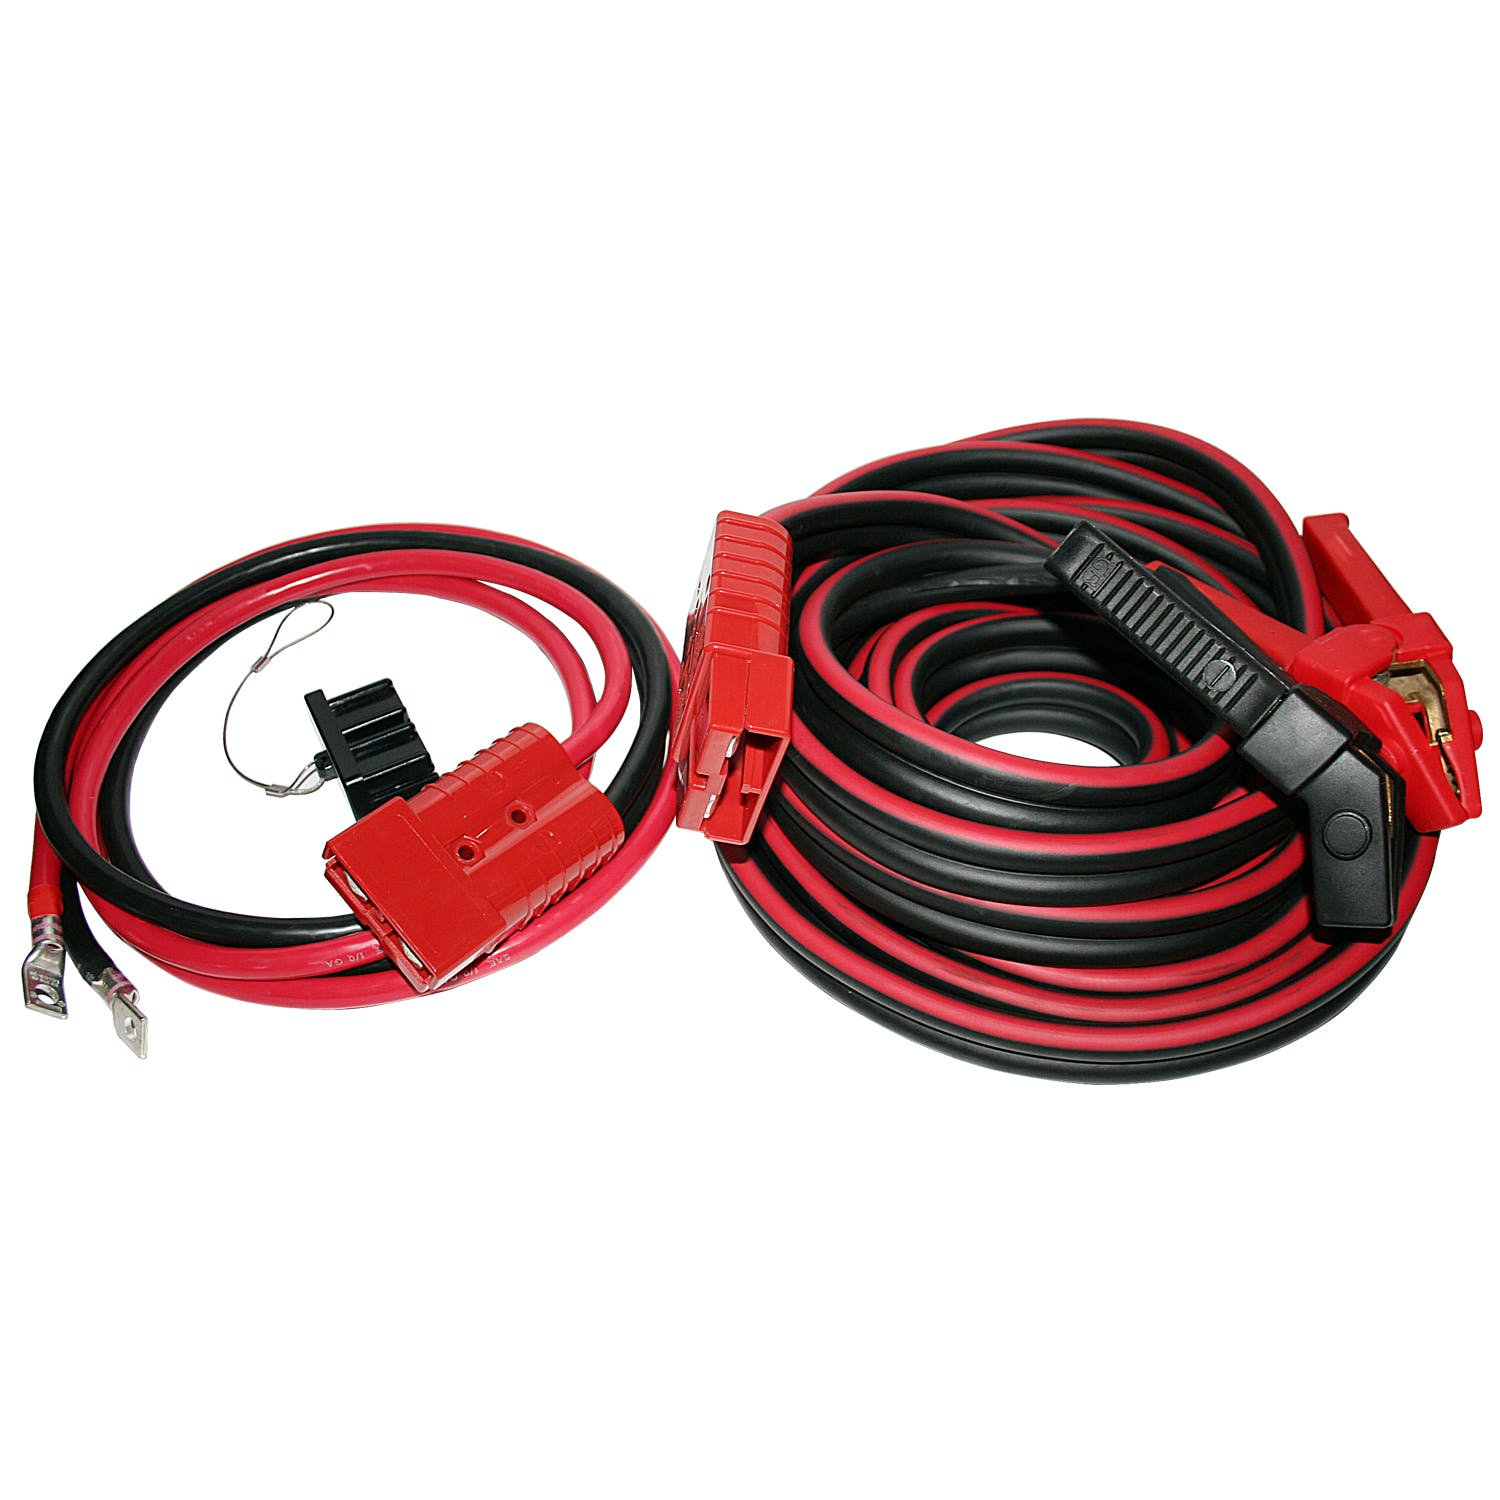 Bulldog Winch Co LLC 20334 Booster Cable Set, 25ft x 1/0ga with Quick Connects